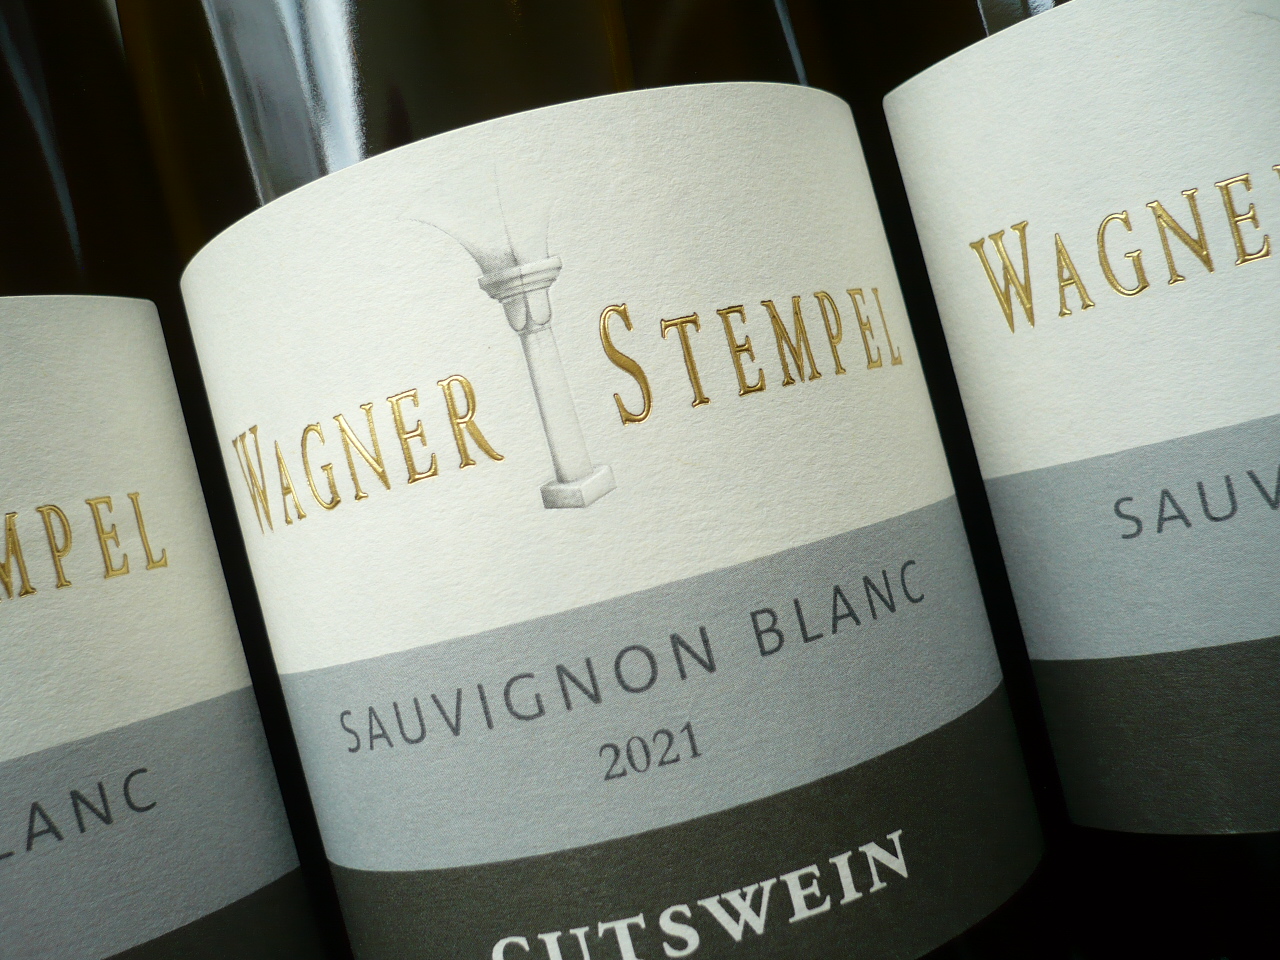 wines wein.plus members find+buy: our The find+buy of wein.plus |